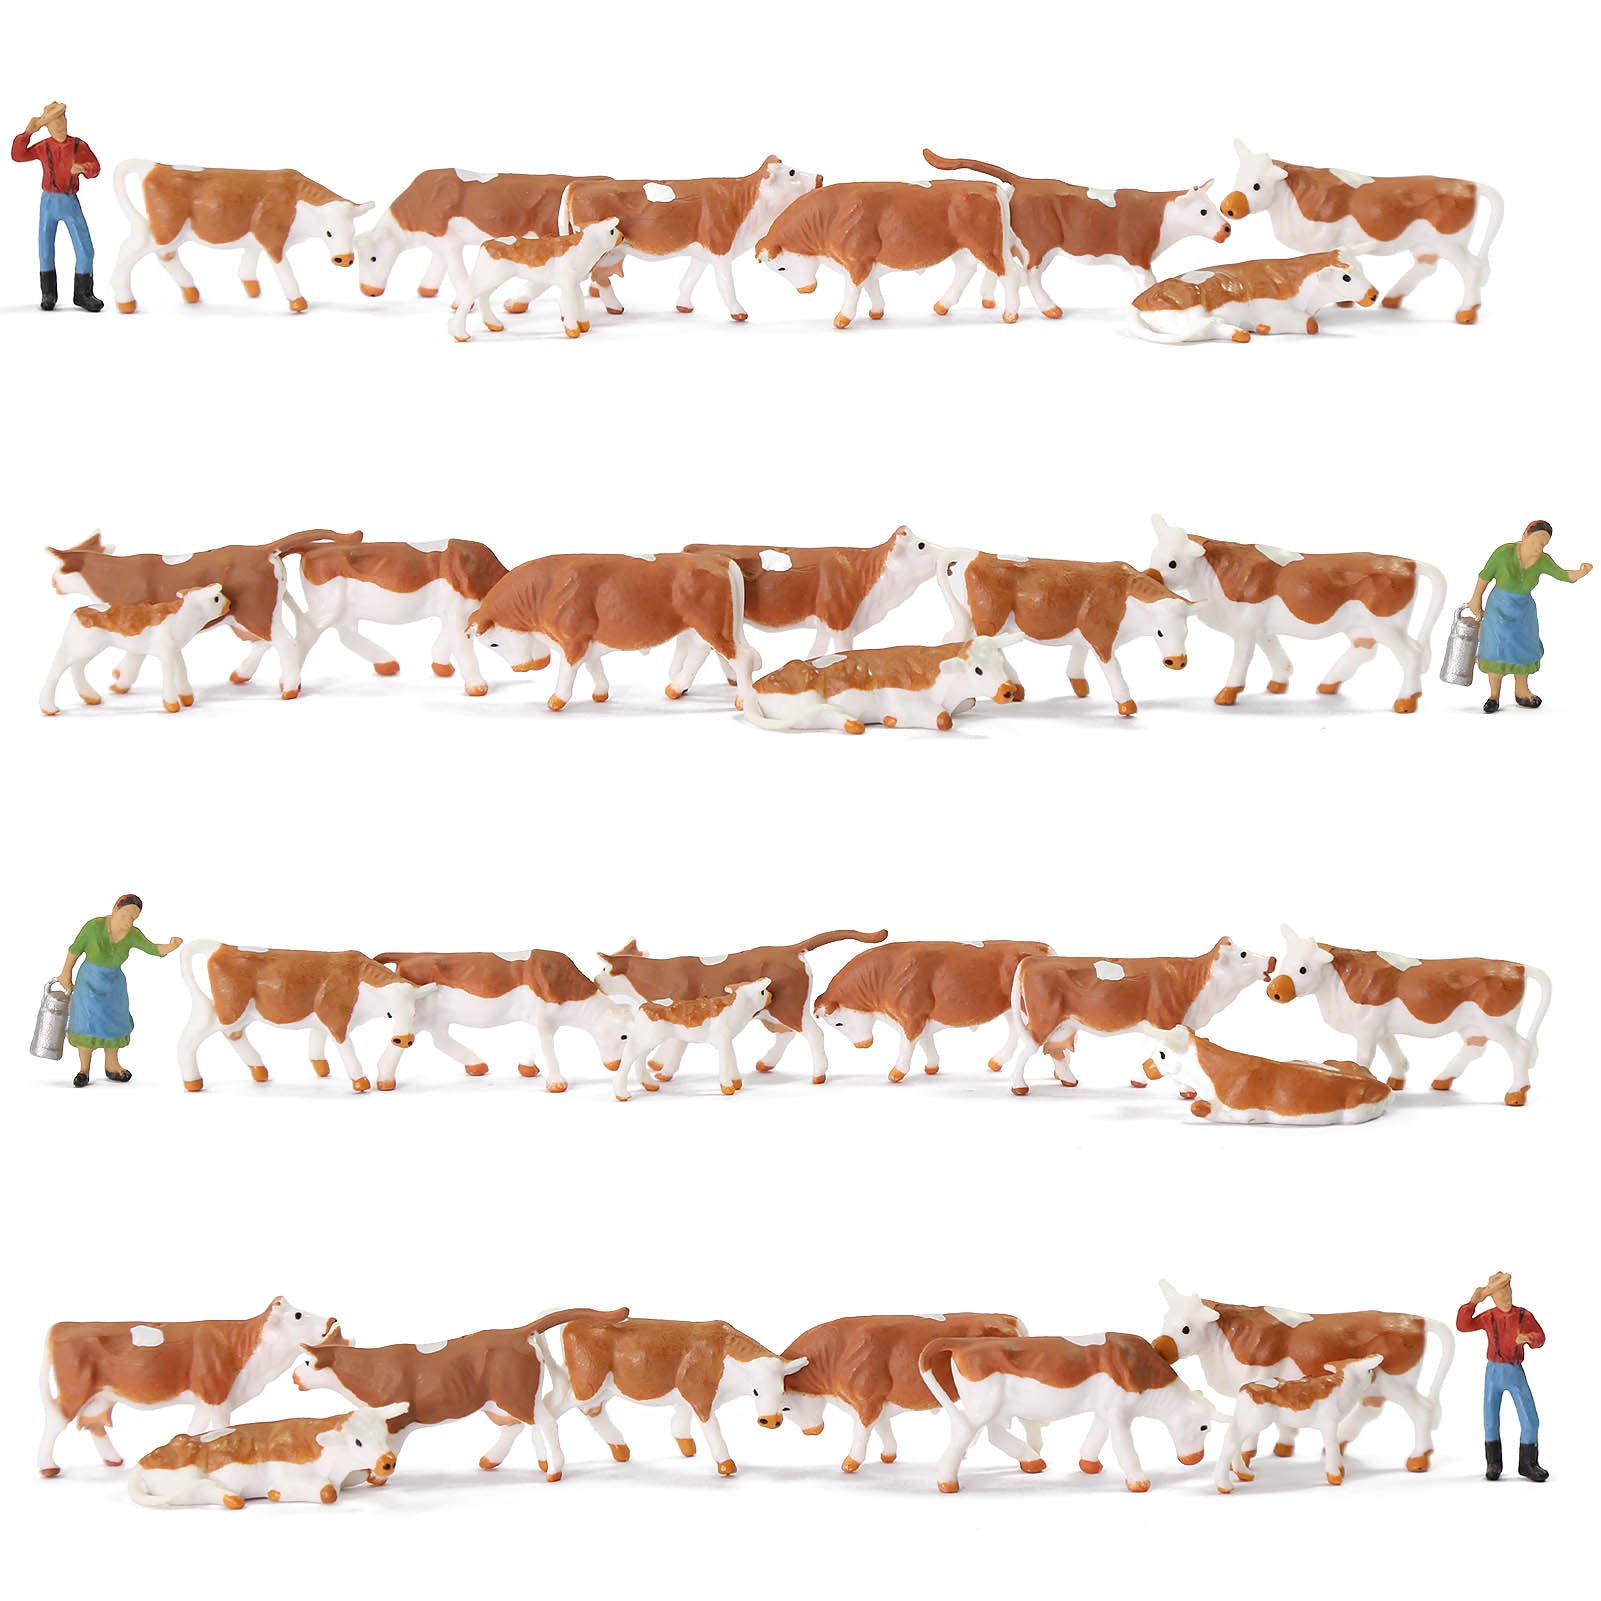 AN8719 36pcs HO Scale 1:87 Painted Brown Cows Cattle Shepherd